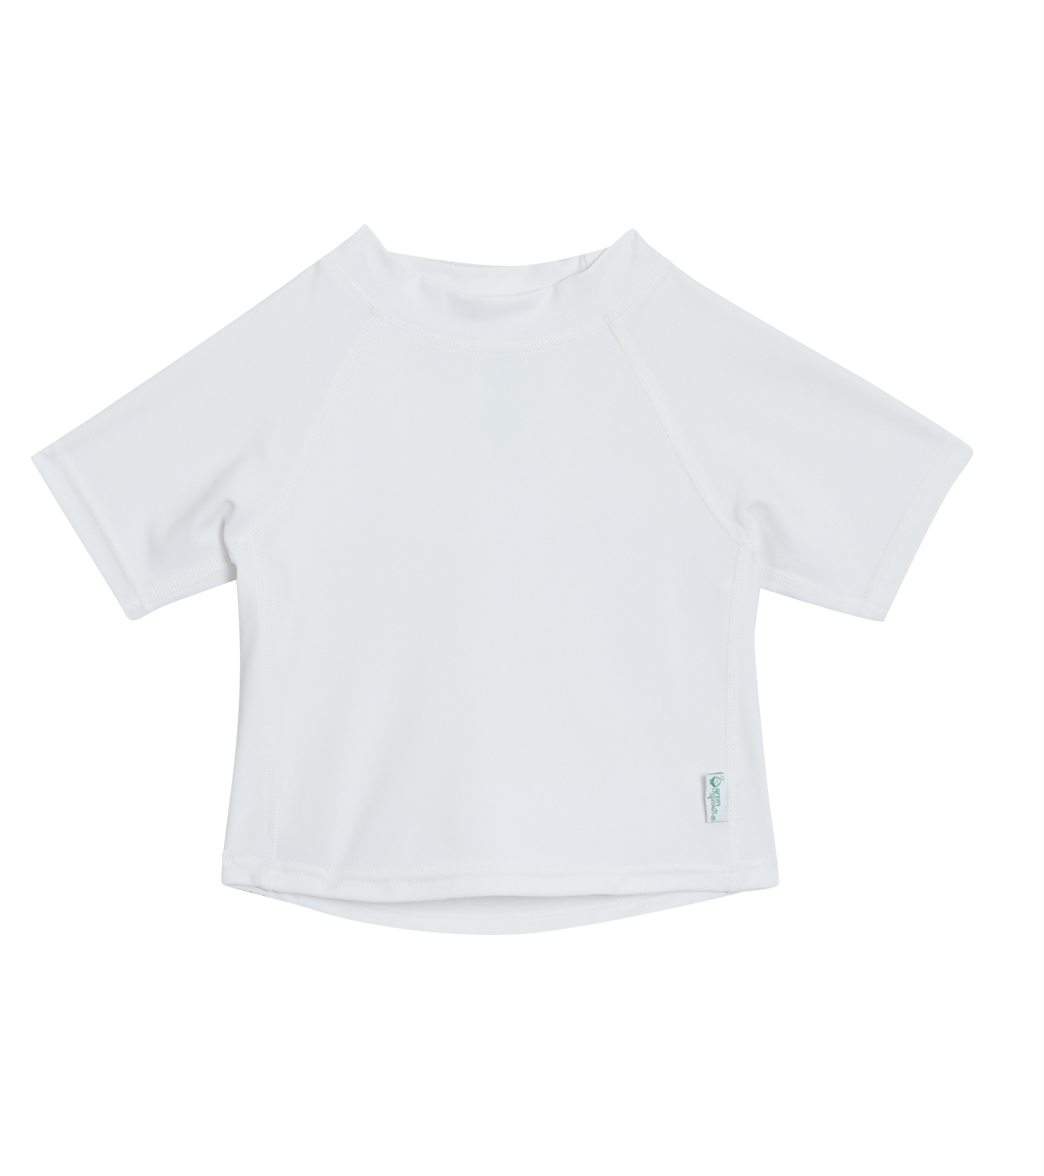 I Play. By Green Sprouts Short Sleeve Rashguard Baby - White 24 Months - Swimoutlet.com